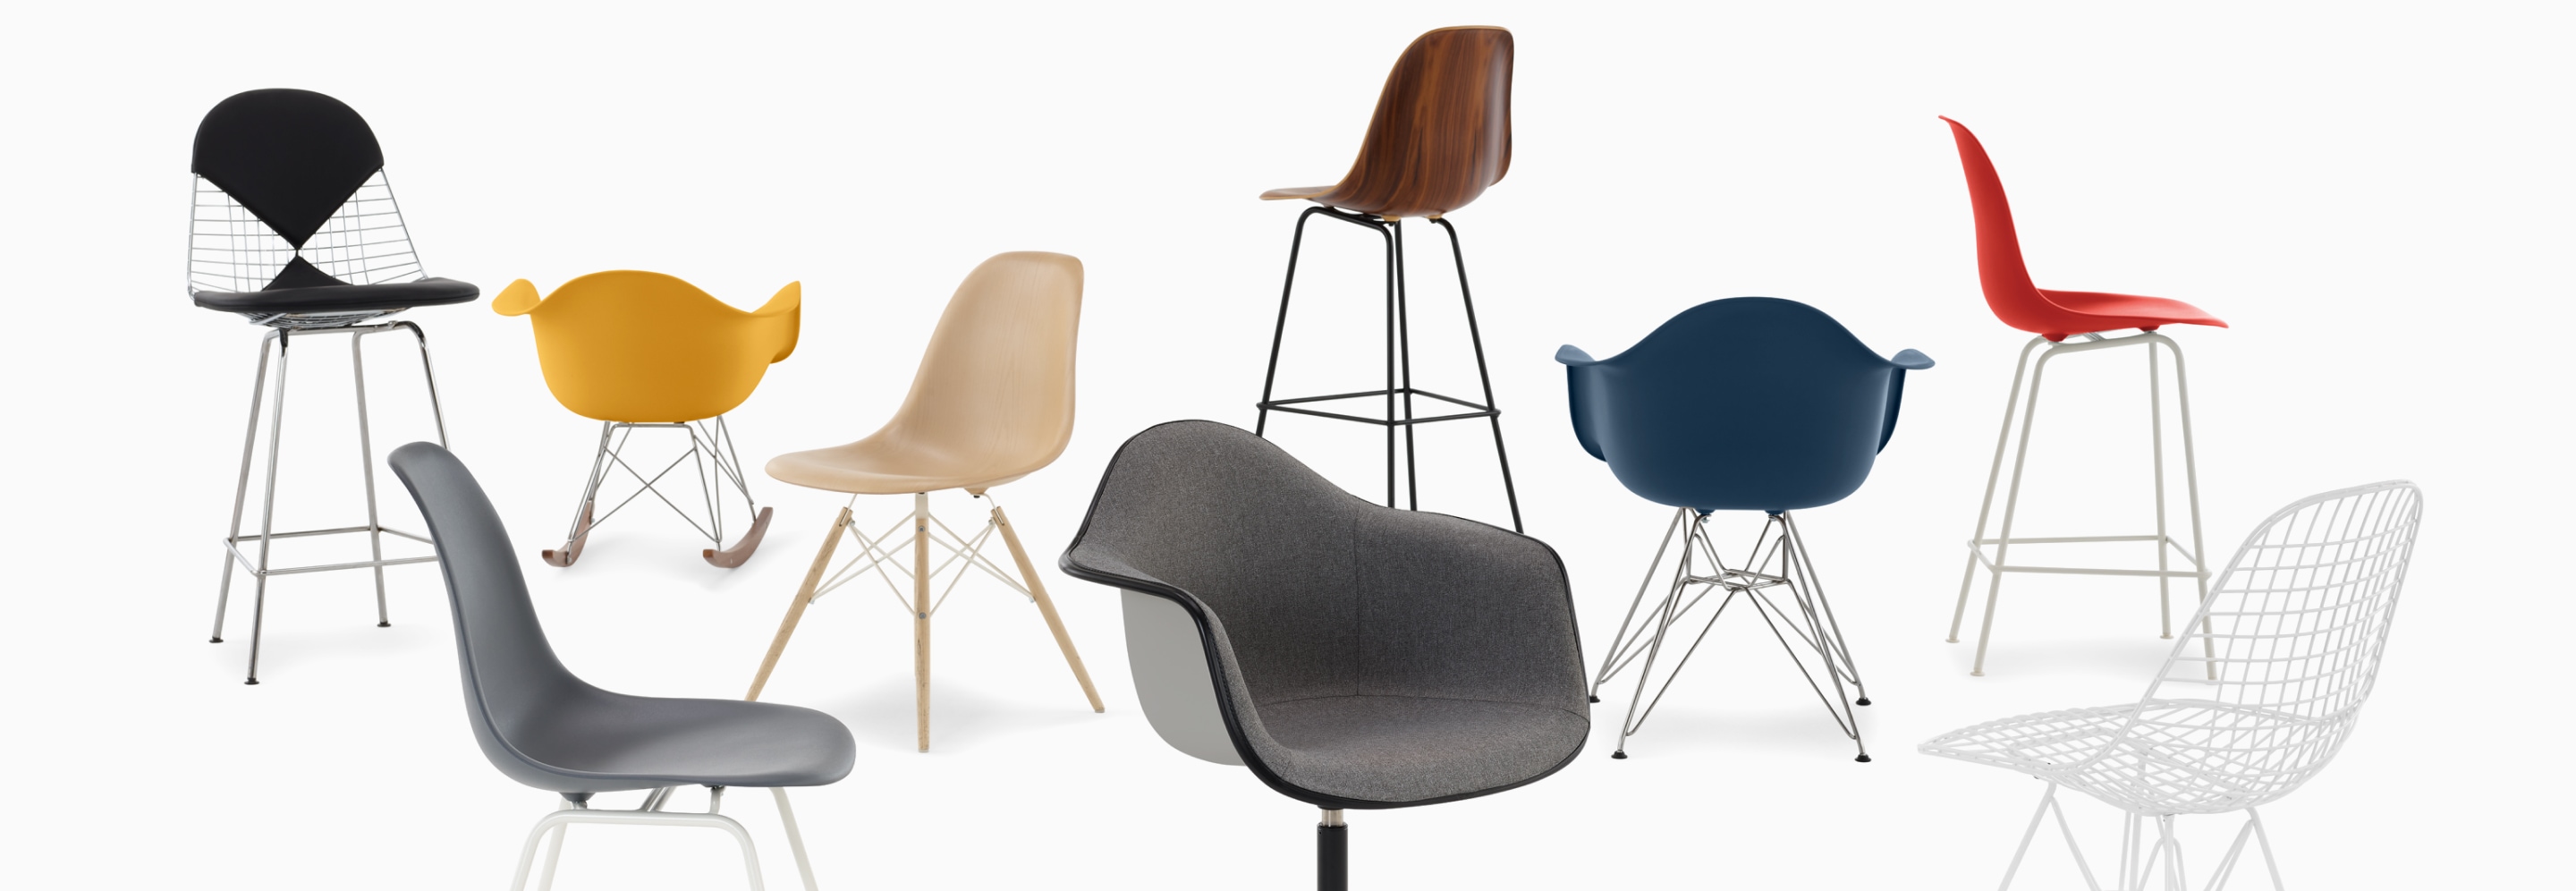 Eames Chair Family - Seating - Herman Miller